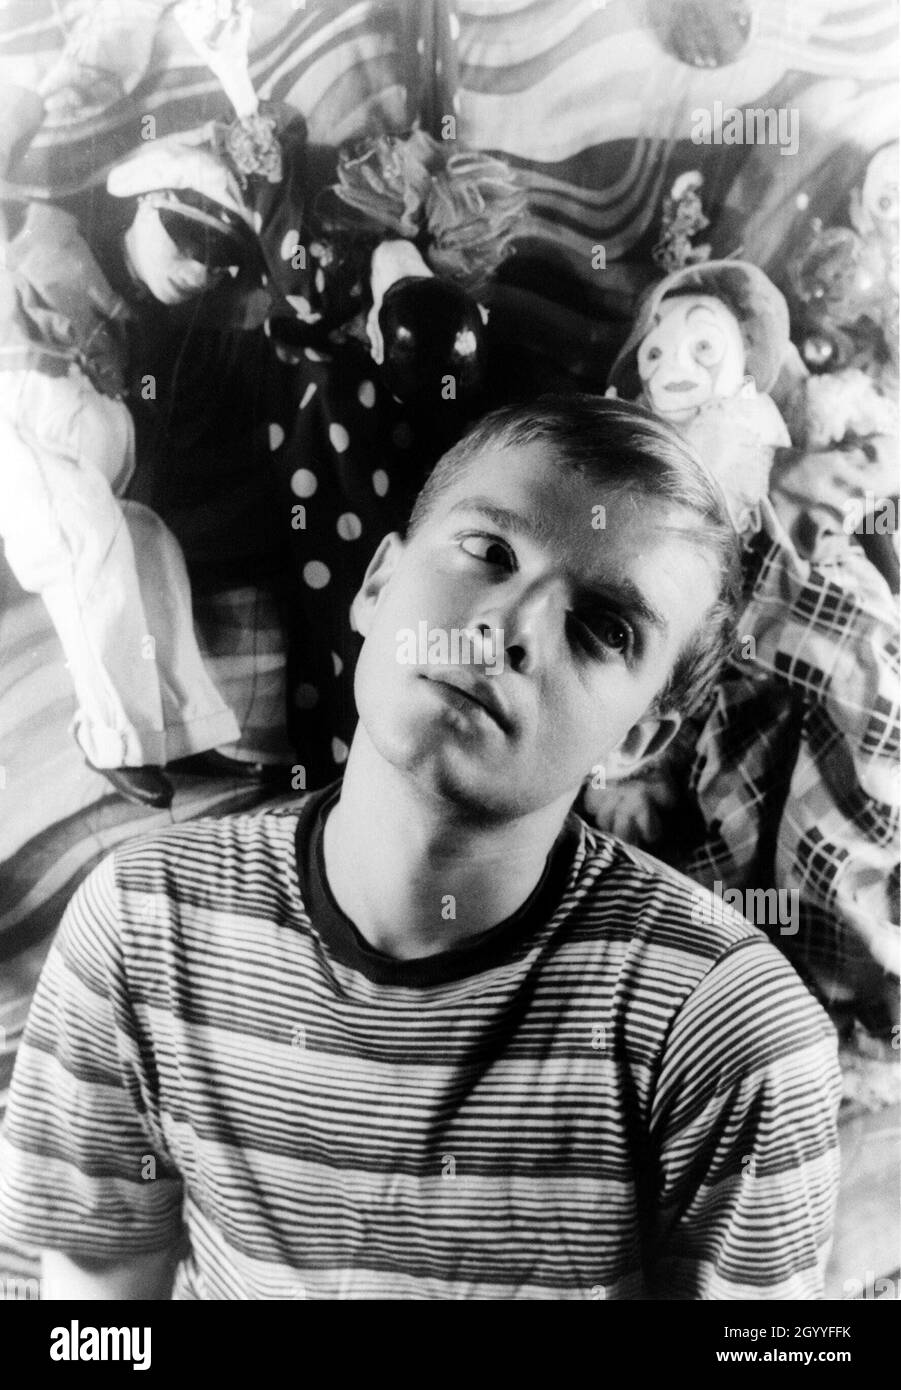 TRUMAN CAPOTE in TRUMAN & TENNESSEE: AN INTIMATE CONVERSATION (2020), directed by LISA IMMORDINO VREELAND. Credit: Fischio Films / Album Stock Photo